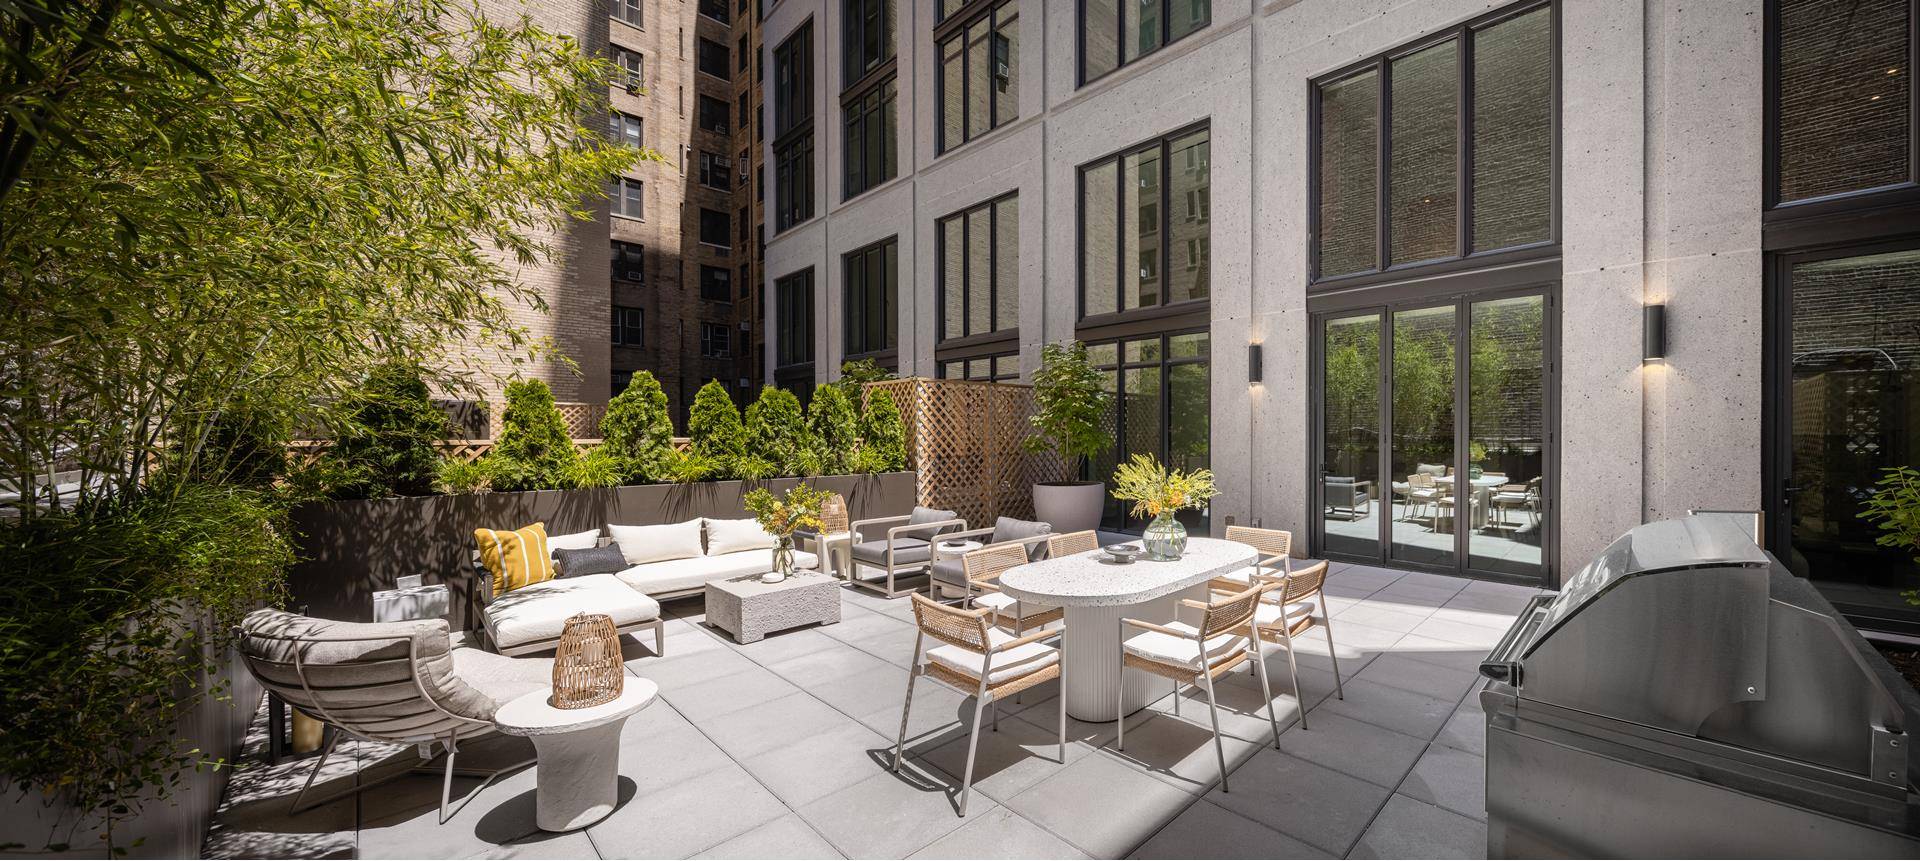 IMMEDIATE OCCUPANCYThis spacious duplex four bedroom, four bath residence features a 952 square foot private terrace positioned directly off the living room, and kitchen embodies indoor outdoor living.